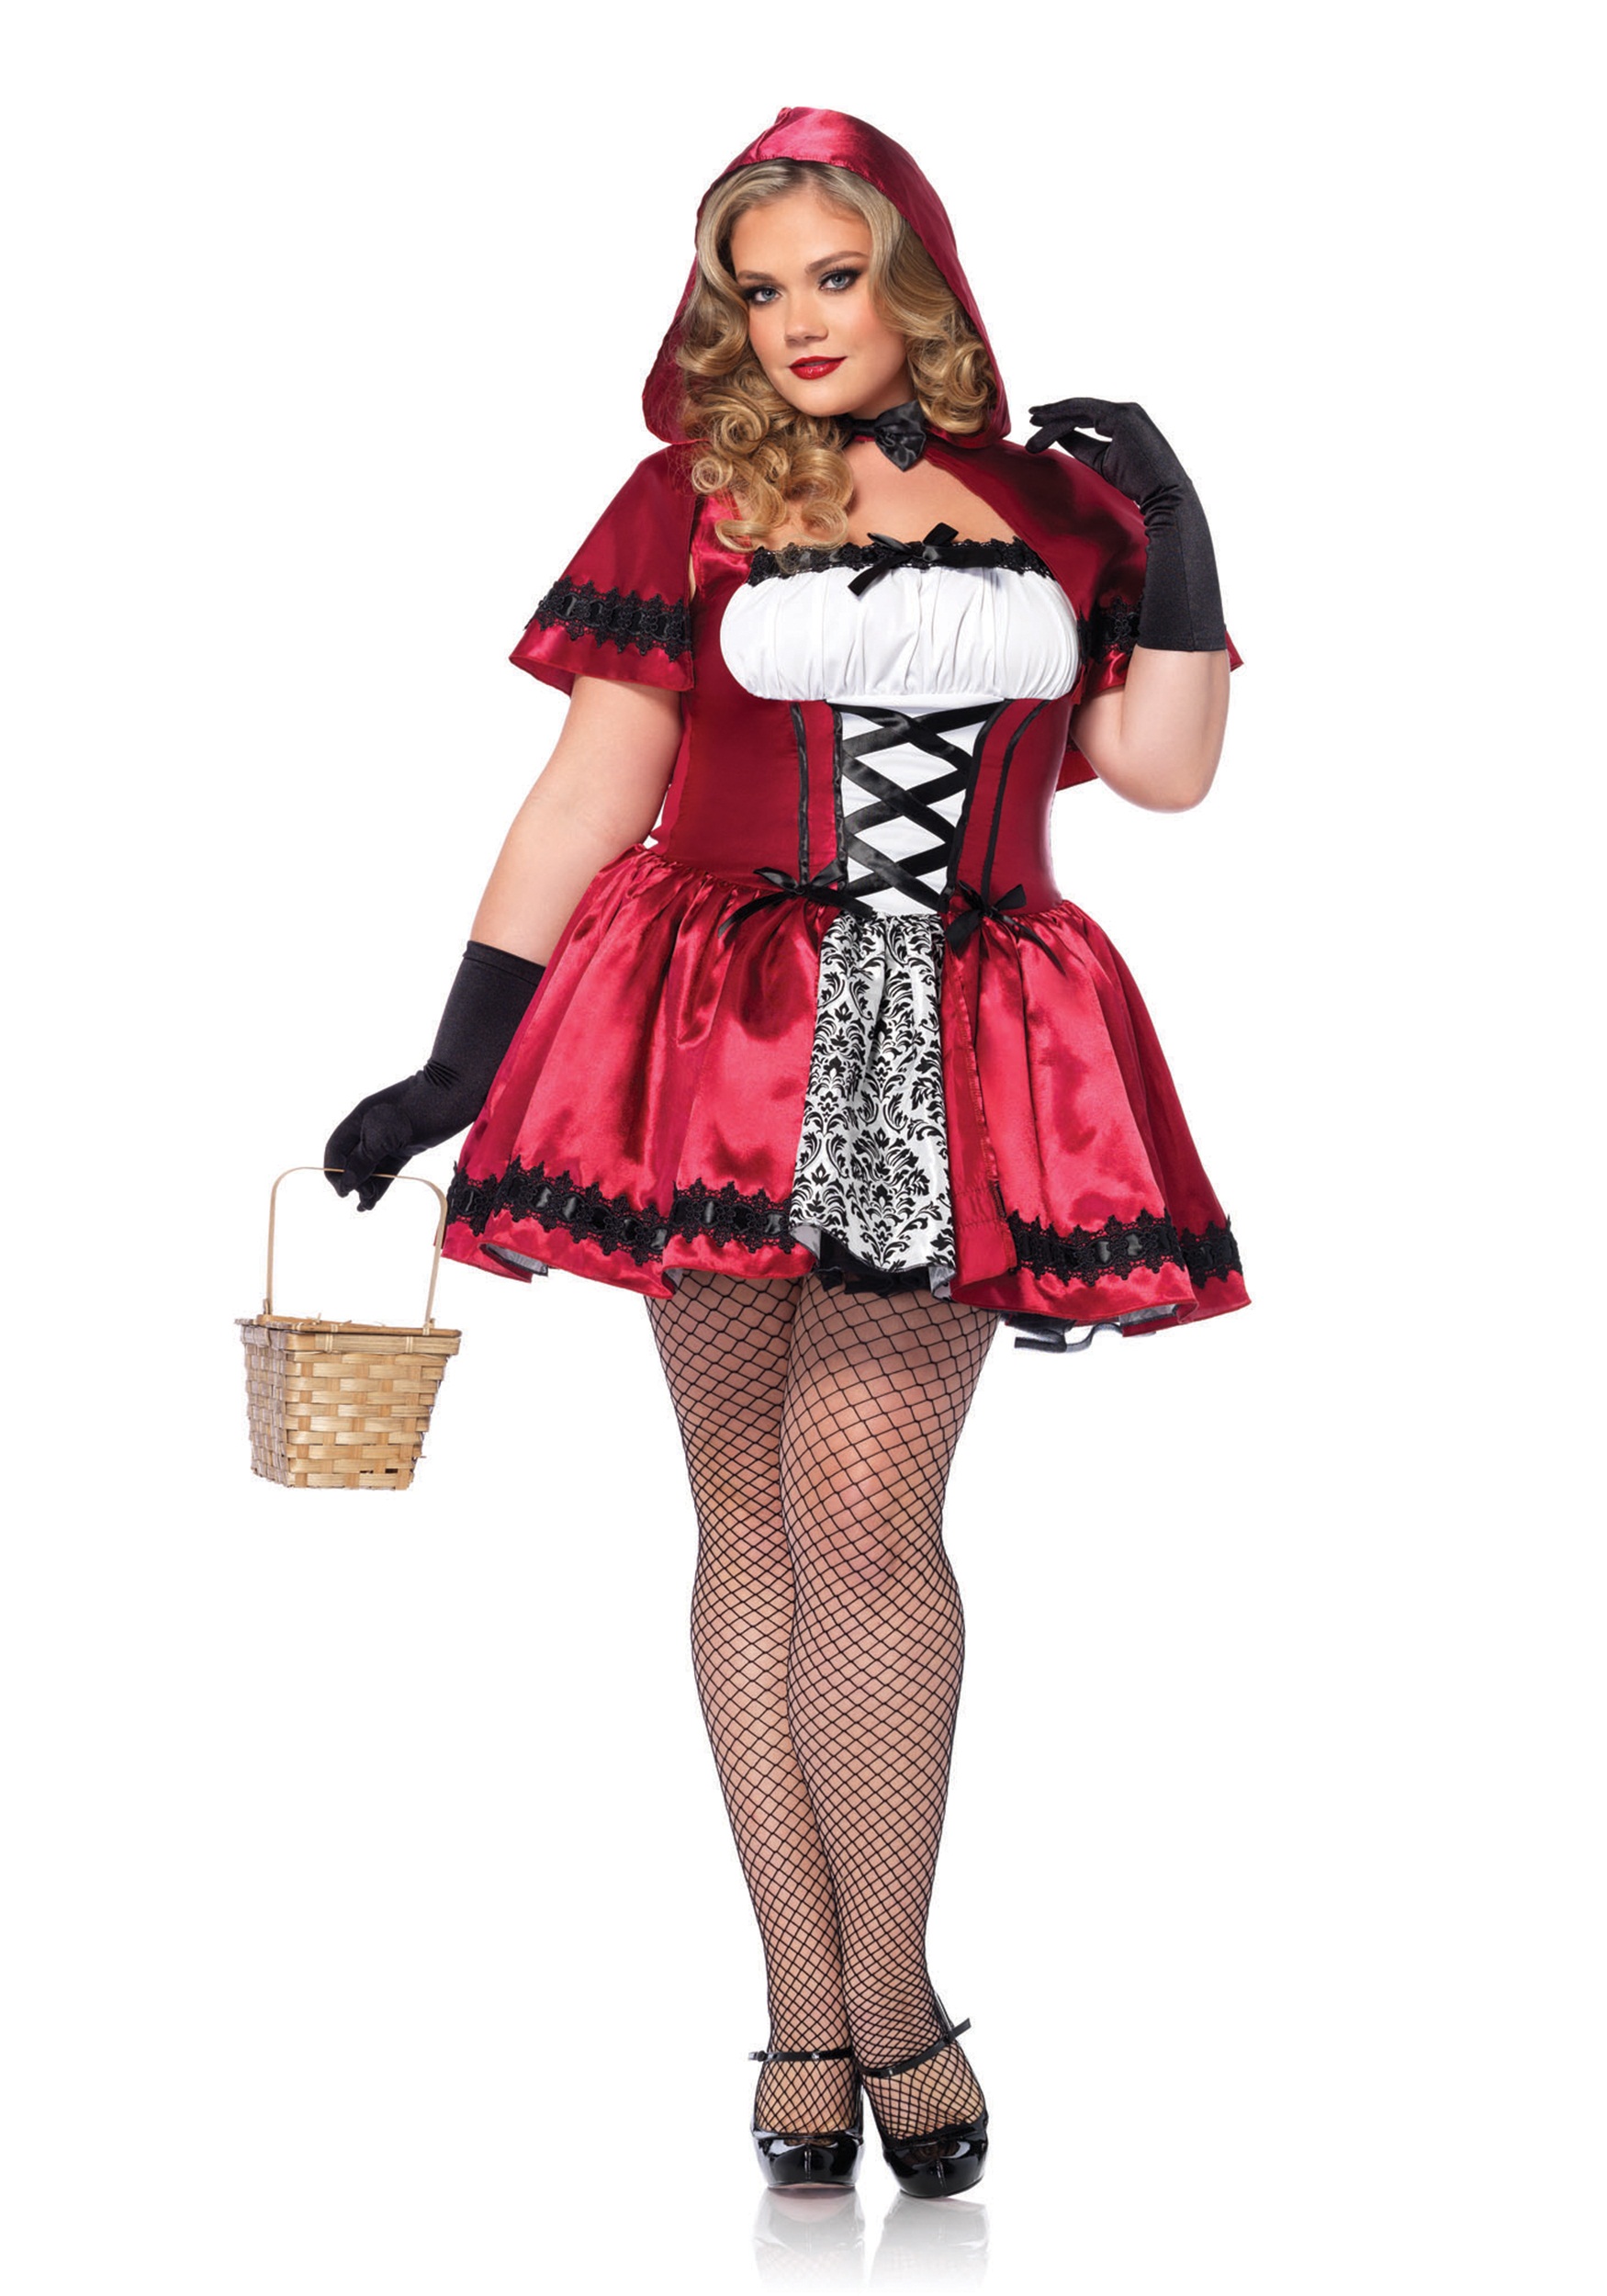 Gothic Red Riding Hood Plus Size Costume - Halloween Costume Ideas 2022.